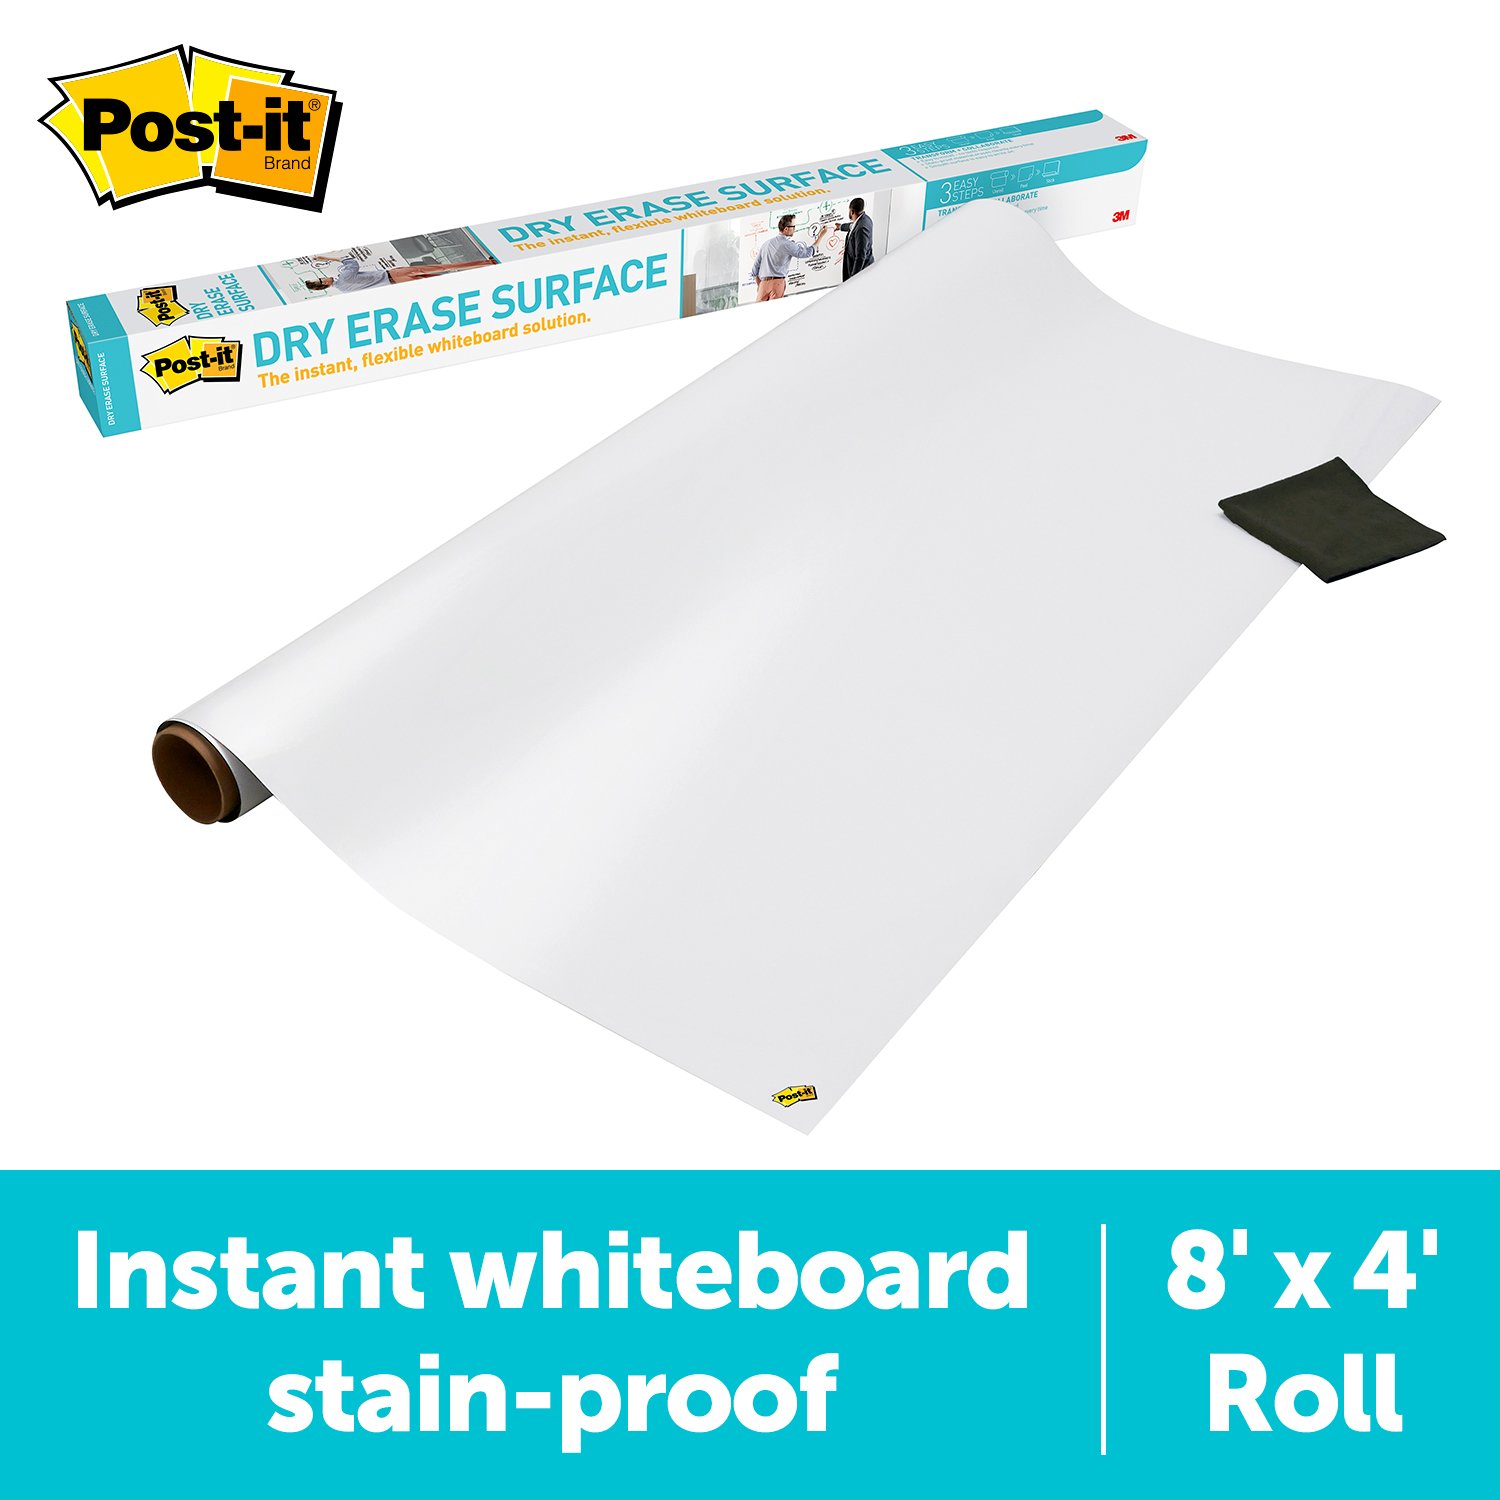 7100096567 - Post-it Super Sticky Dry Erase Surface DEF8x4, 4 ft x 8 ft (1.21 m x
2.43 m)